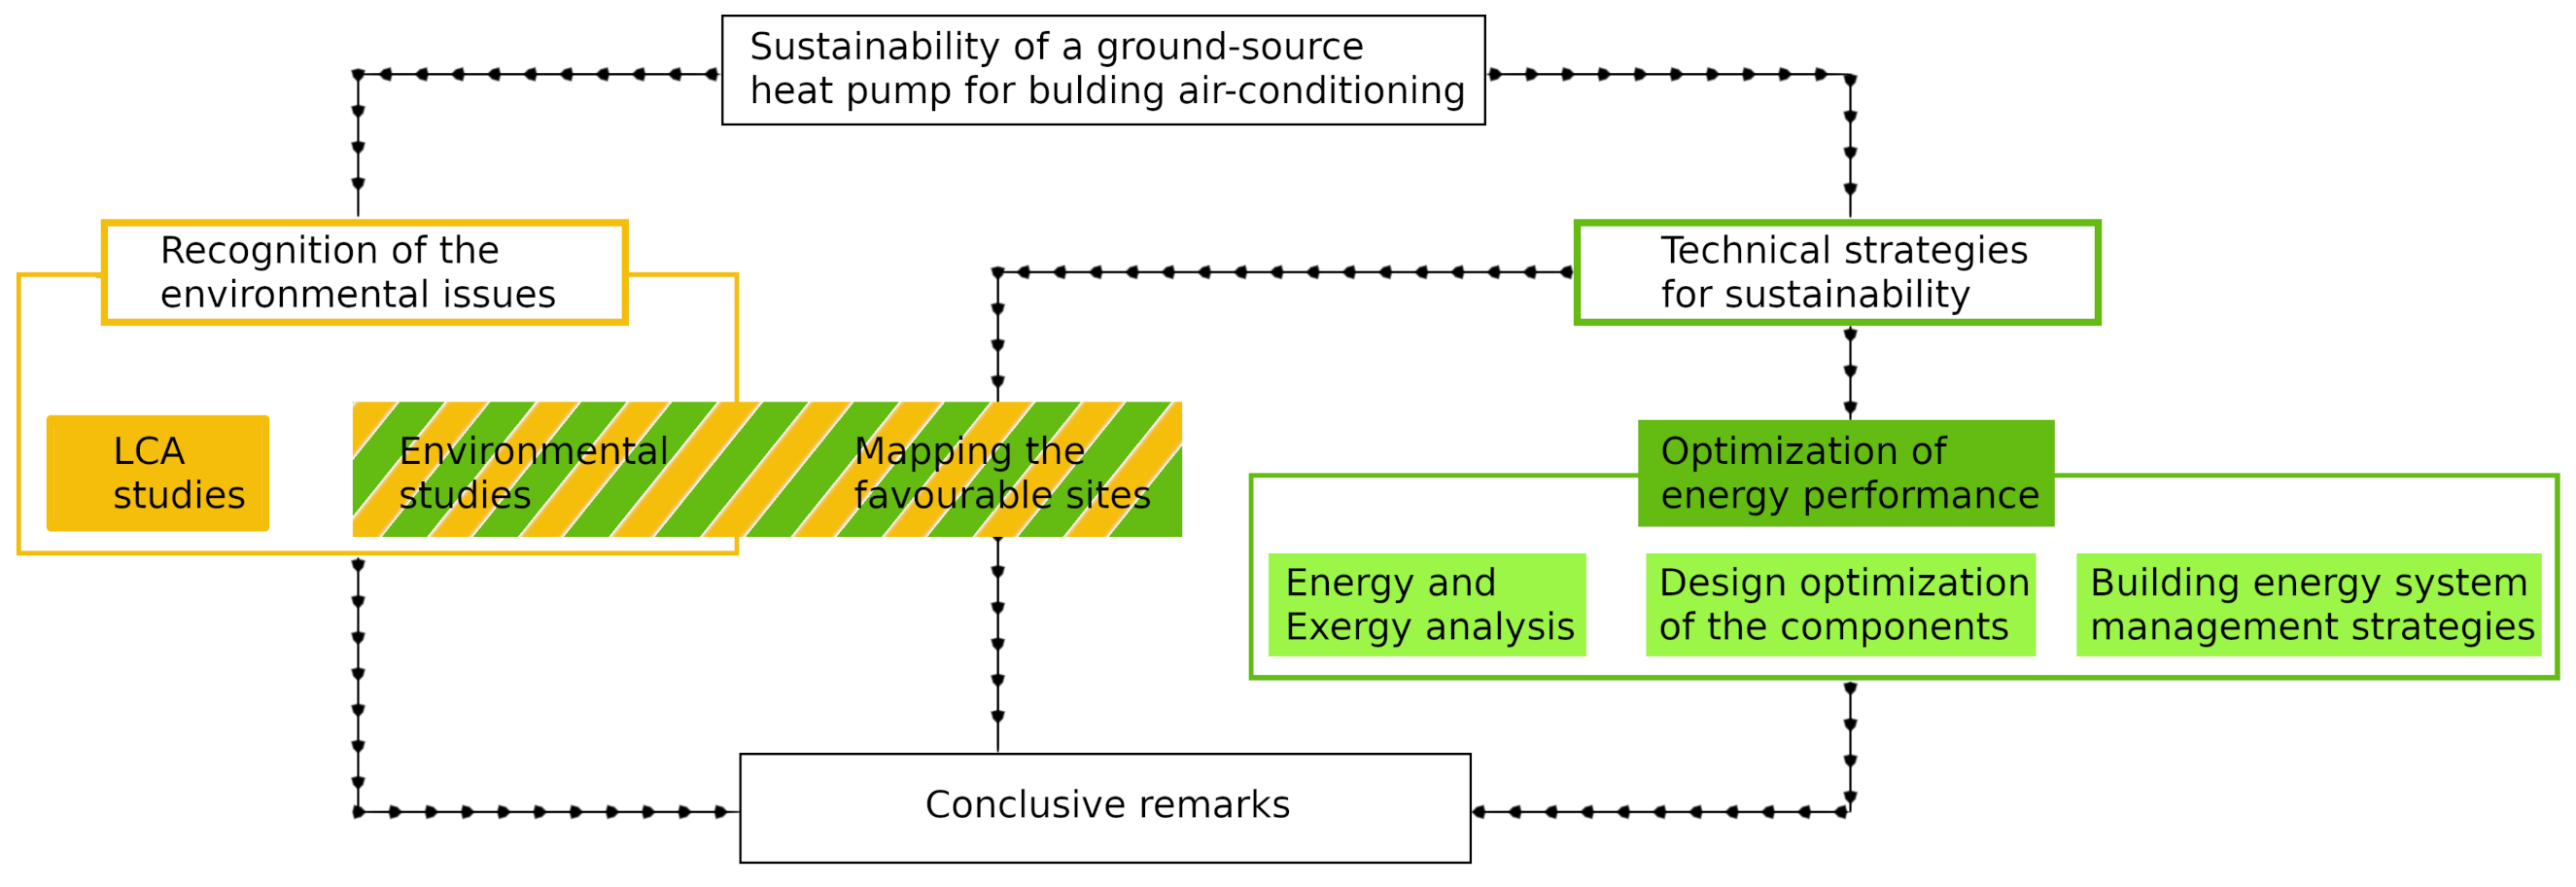 Energies | Free Full-Text | Sustainability of Shallow Geothermal Energy for  Building Air-Conditioning | HTML